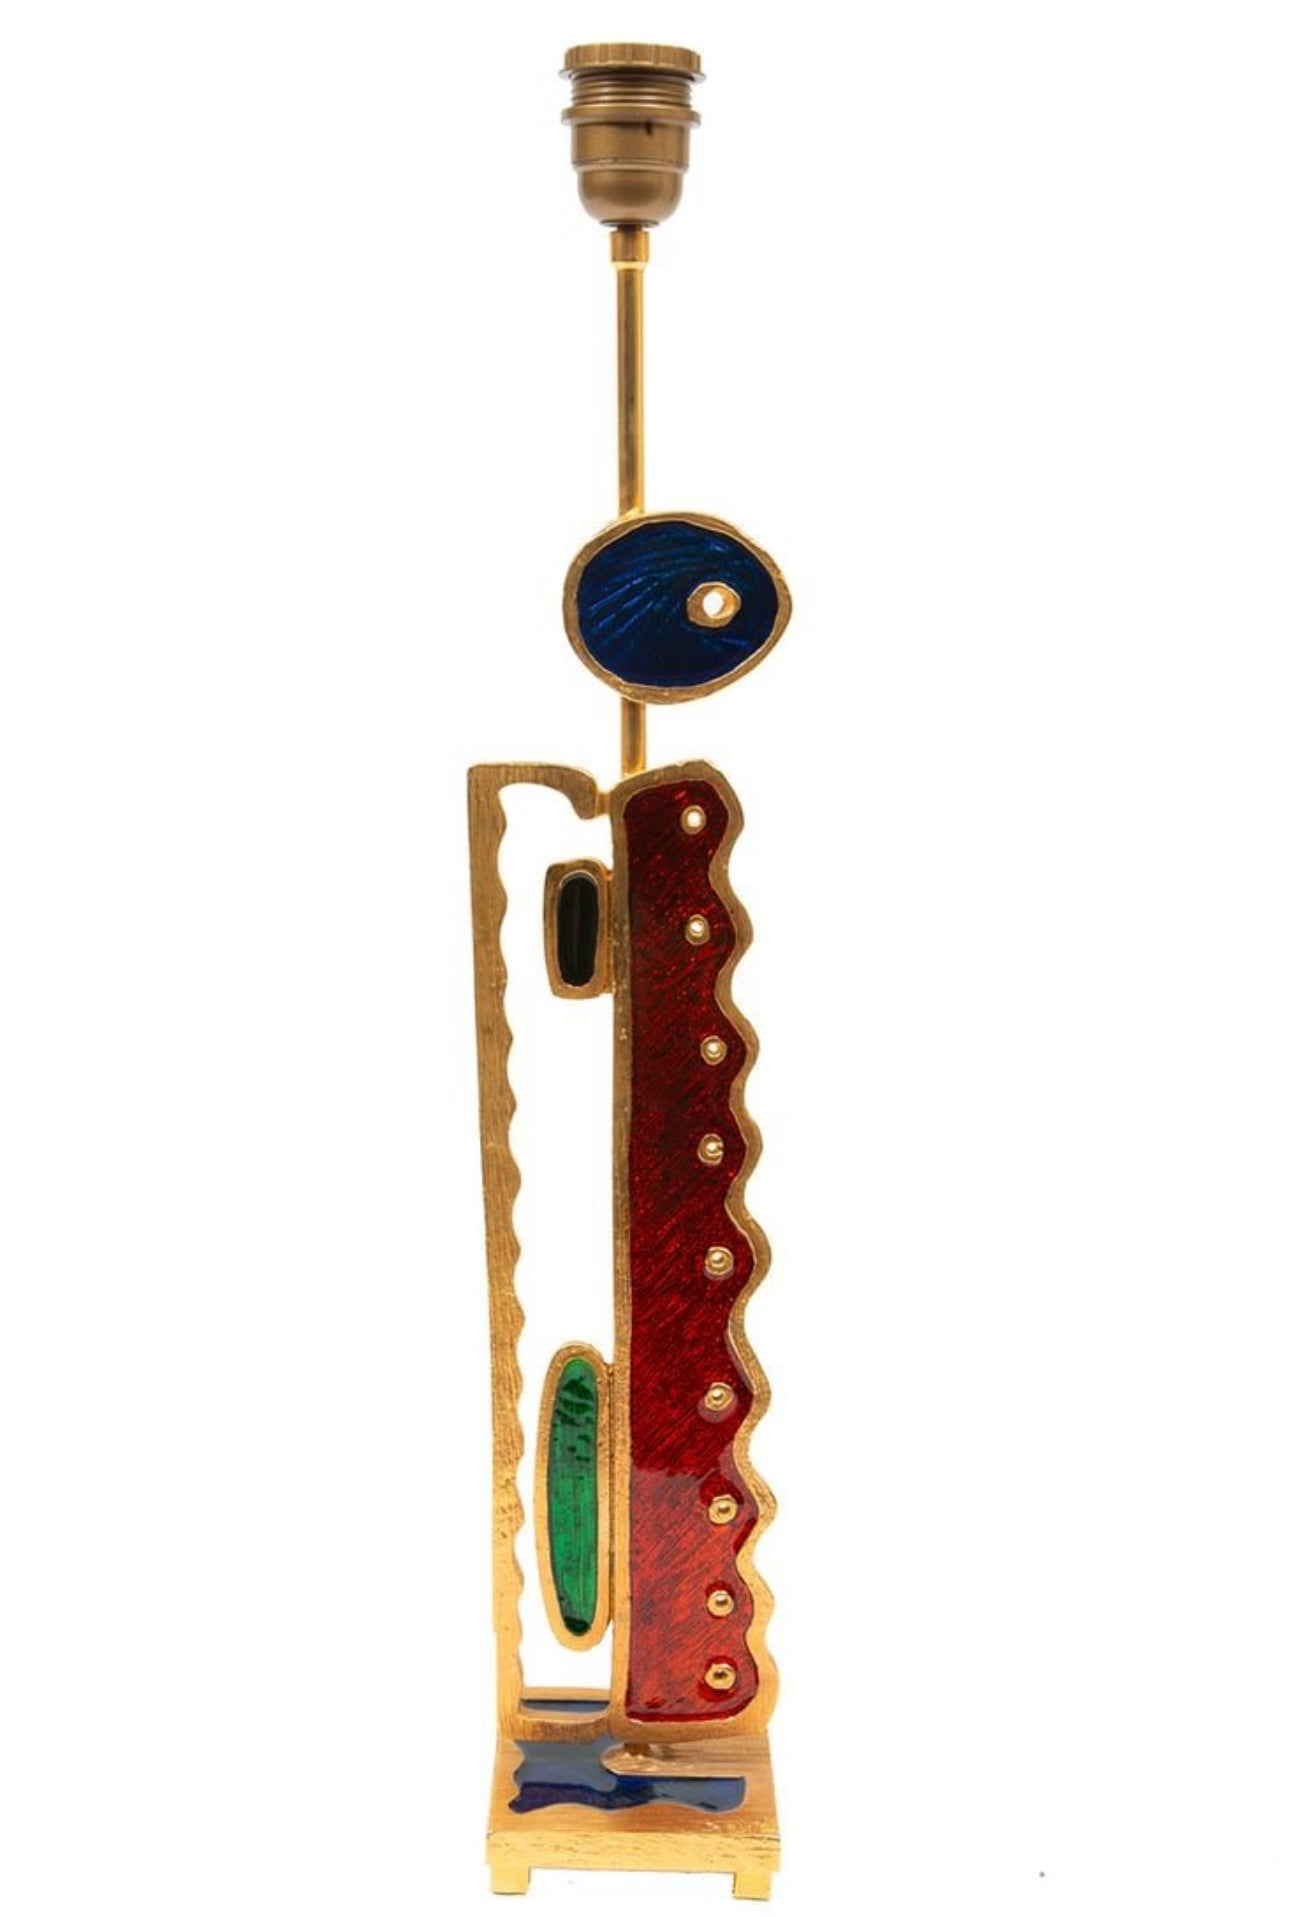 A stunning enamel and gilt metal lamp by Boye for Fondica of France. Signed and dated 2004. The enamel work is quite beautiful and vibrant. The lamp looks as if its leaning a bit from the rear but it is intentional as it appears straight from the